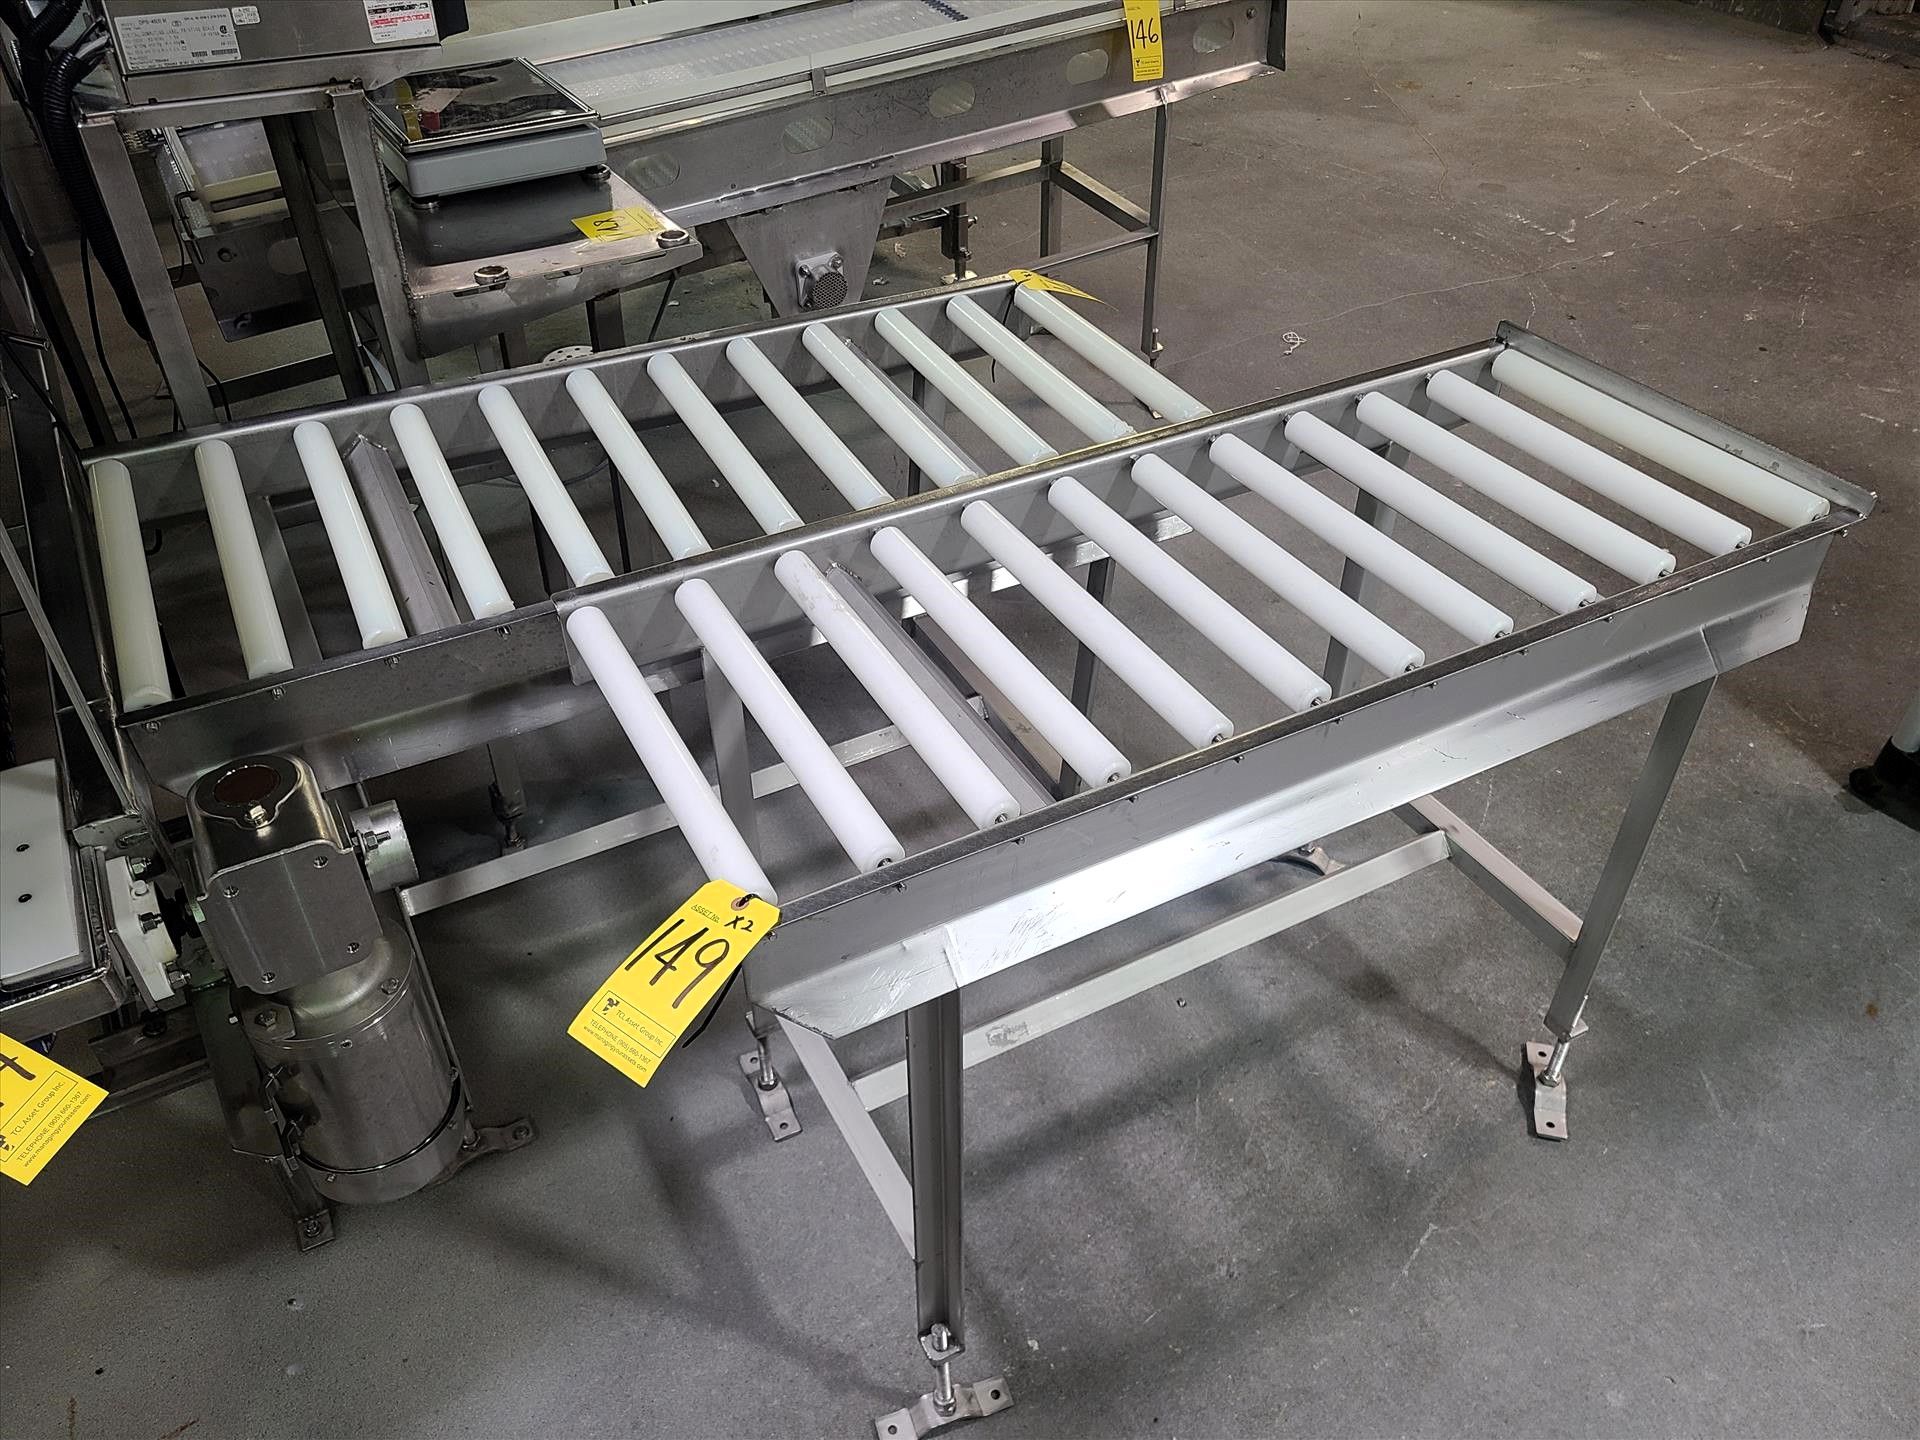 (2) roller conveyors, approx. 17 in. x 4 ft., stainless steel [Loc. Whole Bird]